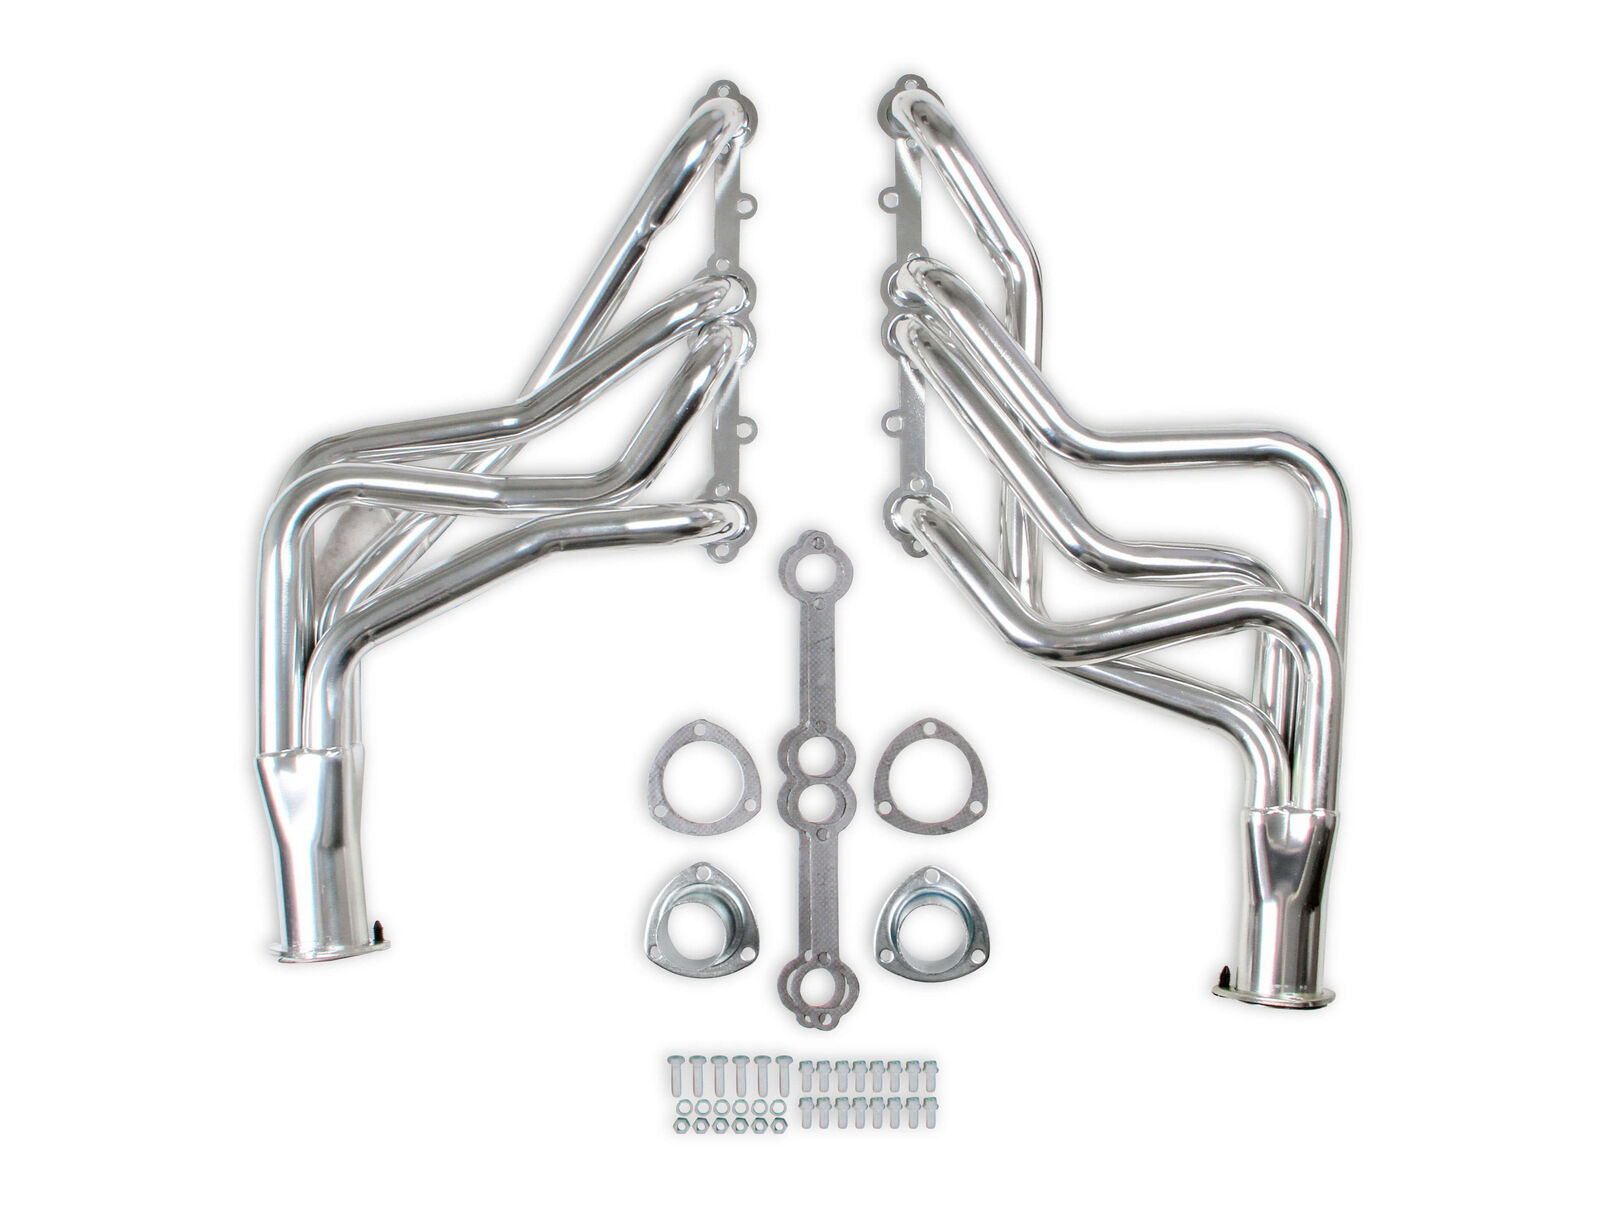 Flowtech Mild SS Silver Ceramic Coated Long Tube Exhaust for Chevy Bel Air 65-75